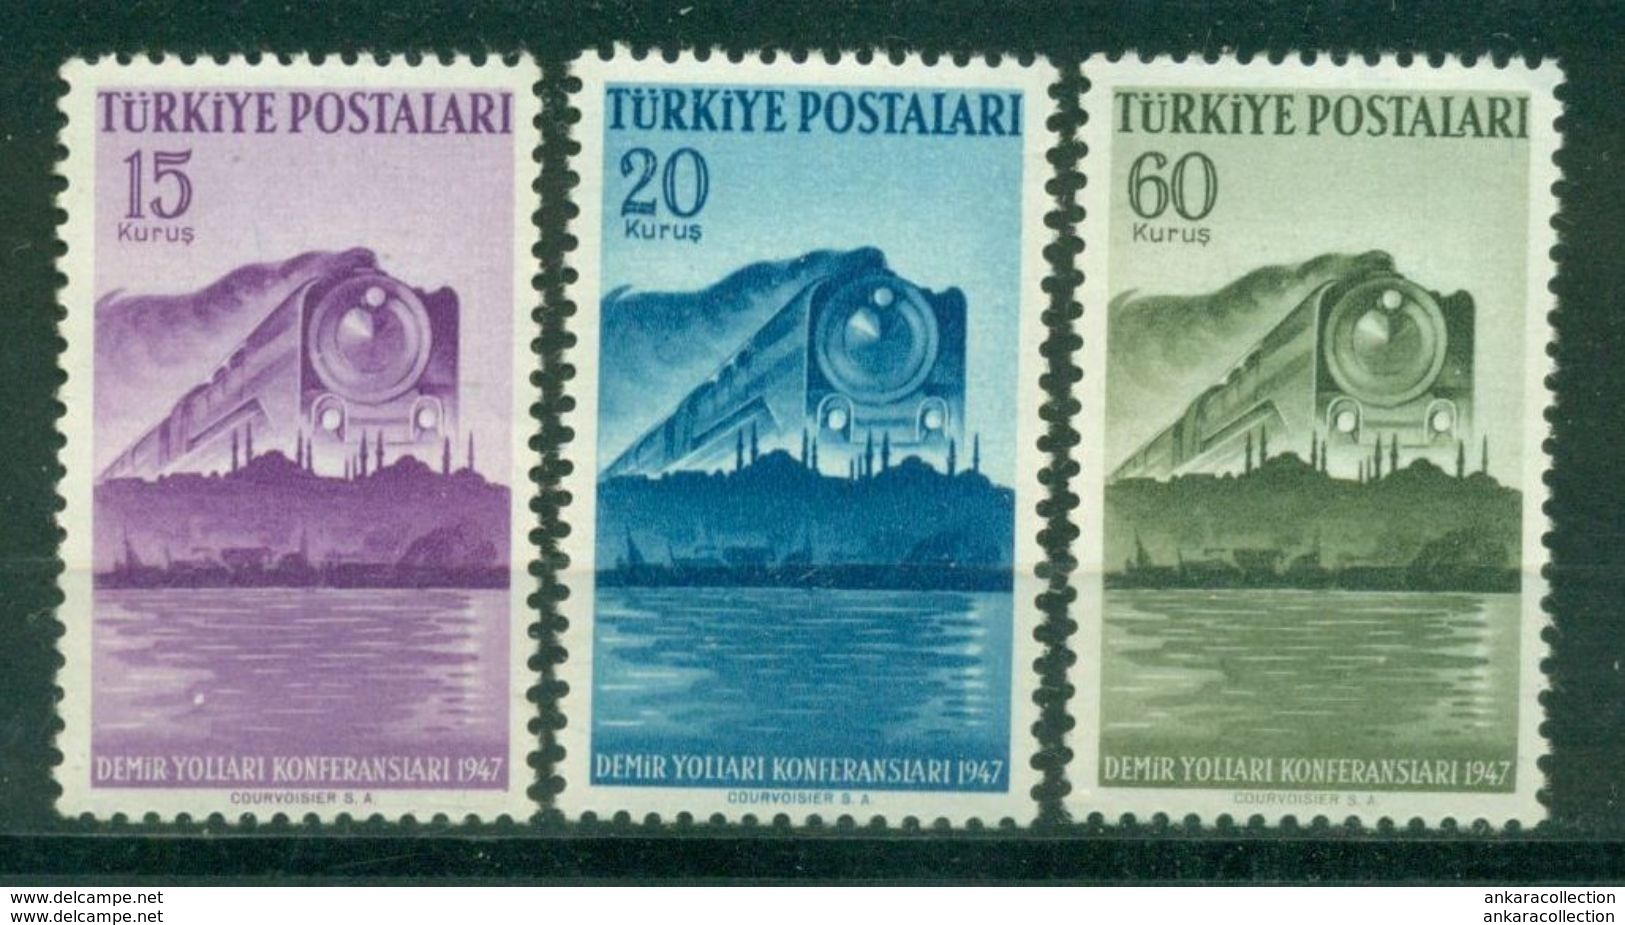 AC - TURKEY STAMP - THE INTERNATIONAL RAILROAD CONFERENCES MNH 09 OCTOBER 1947 - Neufs